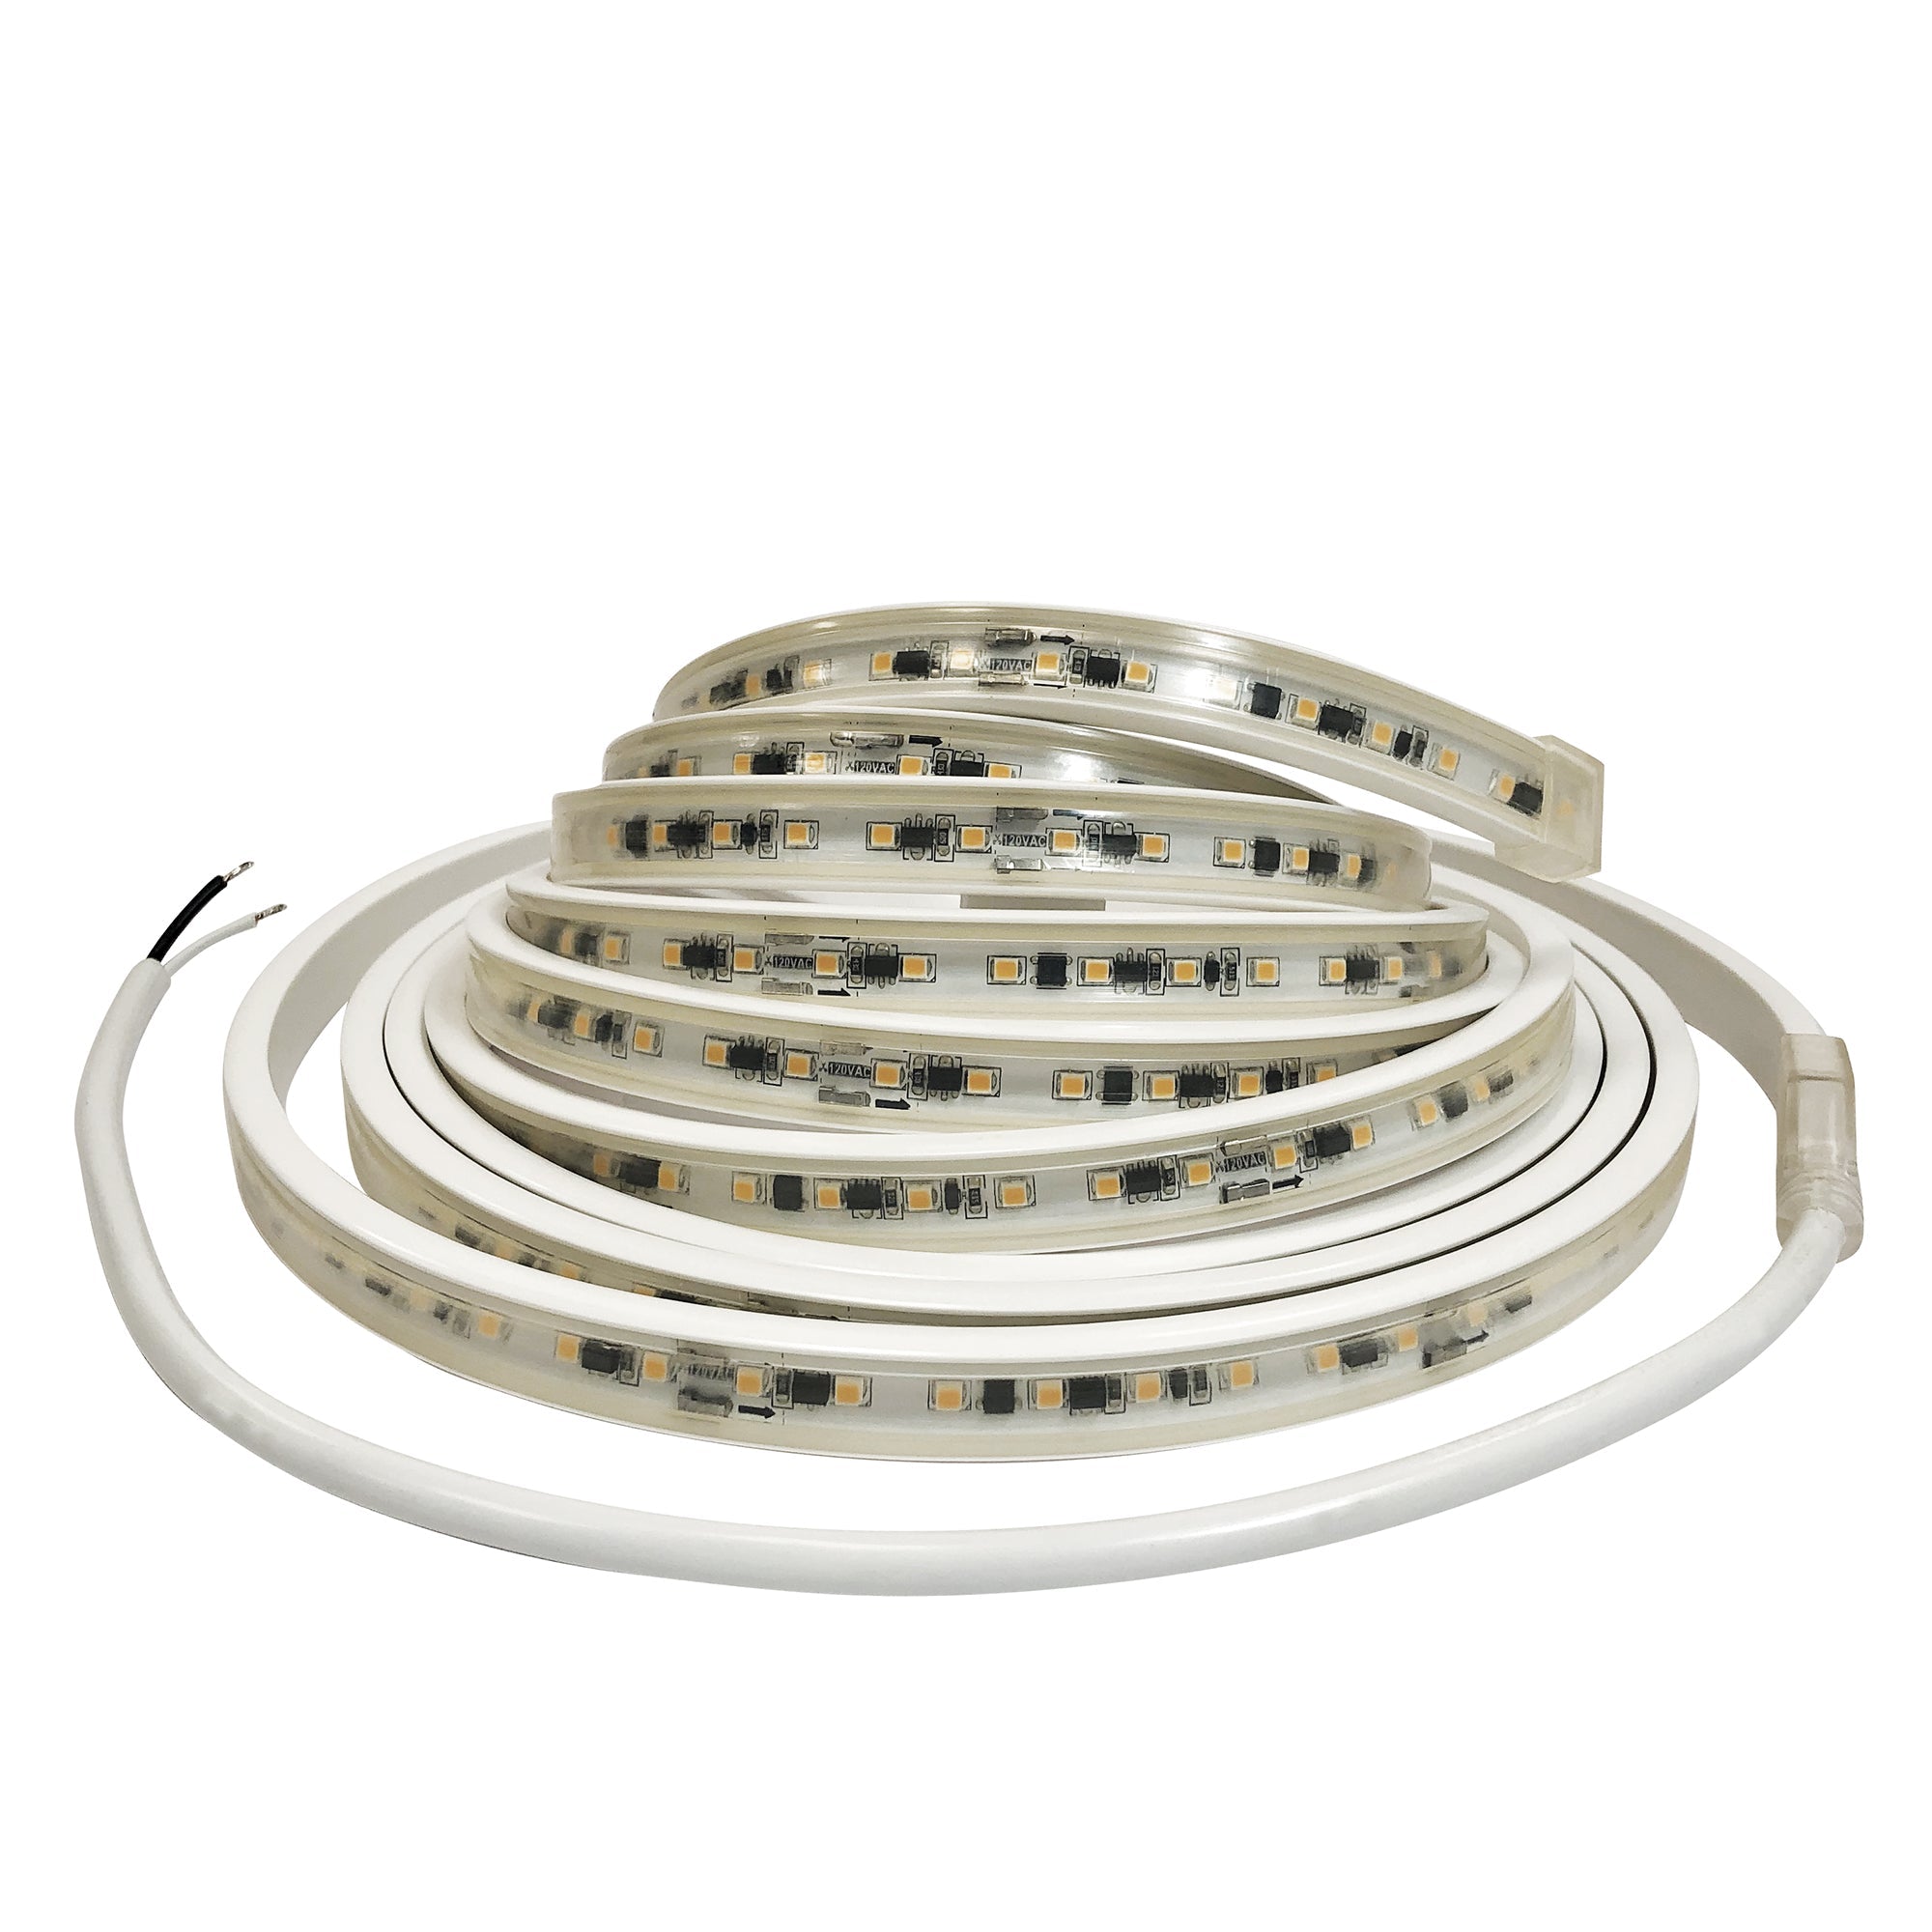 Nora Lighting NUTP13-W57-4-12-930/HW - Accent / Undercabinet - Custom Cut 57-ft, 4-in 120V Continuous LED Tape Light, 330lm / 3.6W per foot, 3000K, w/ Mounting Clips and 8' Hardwired Power Cord